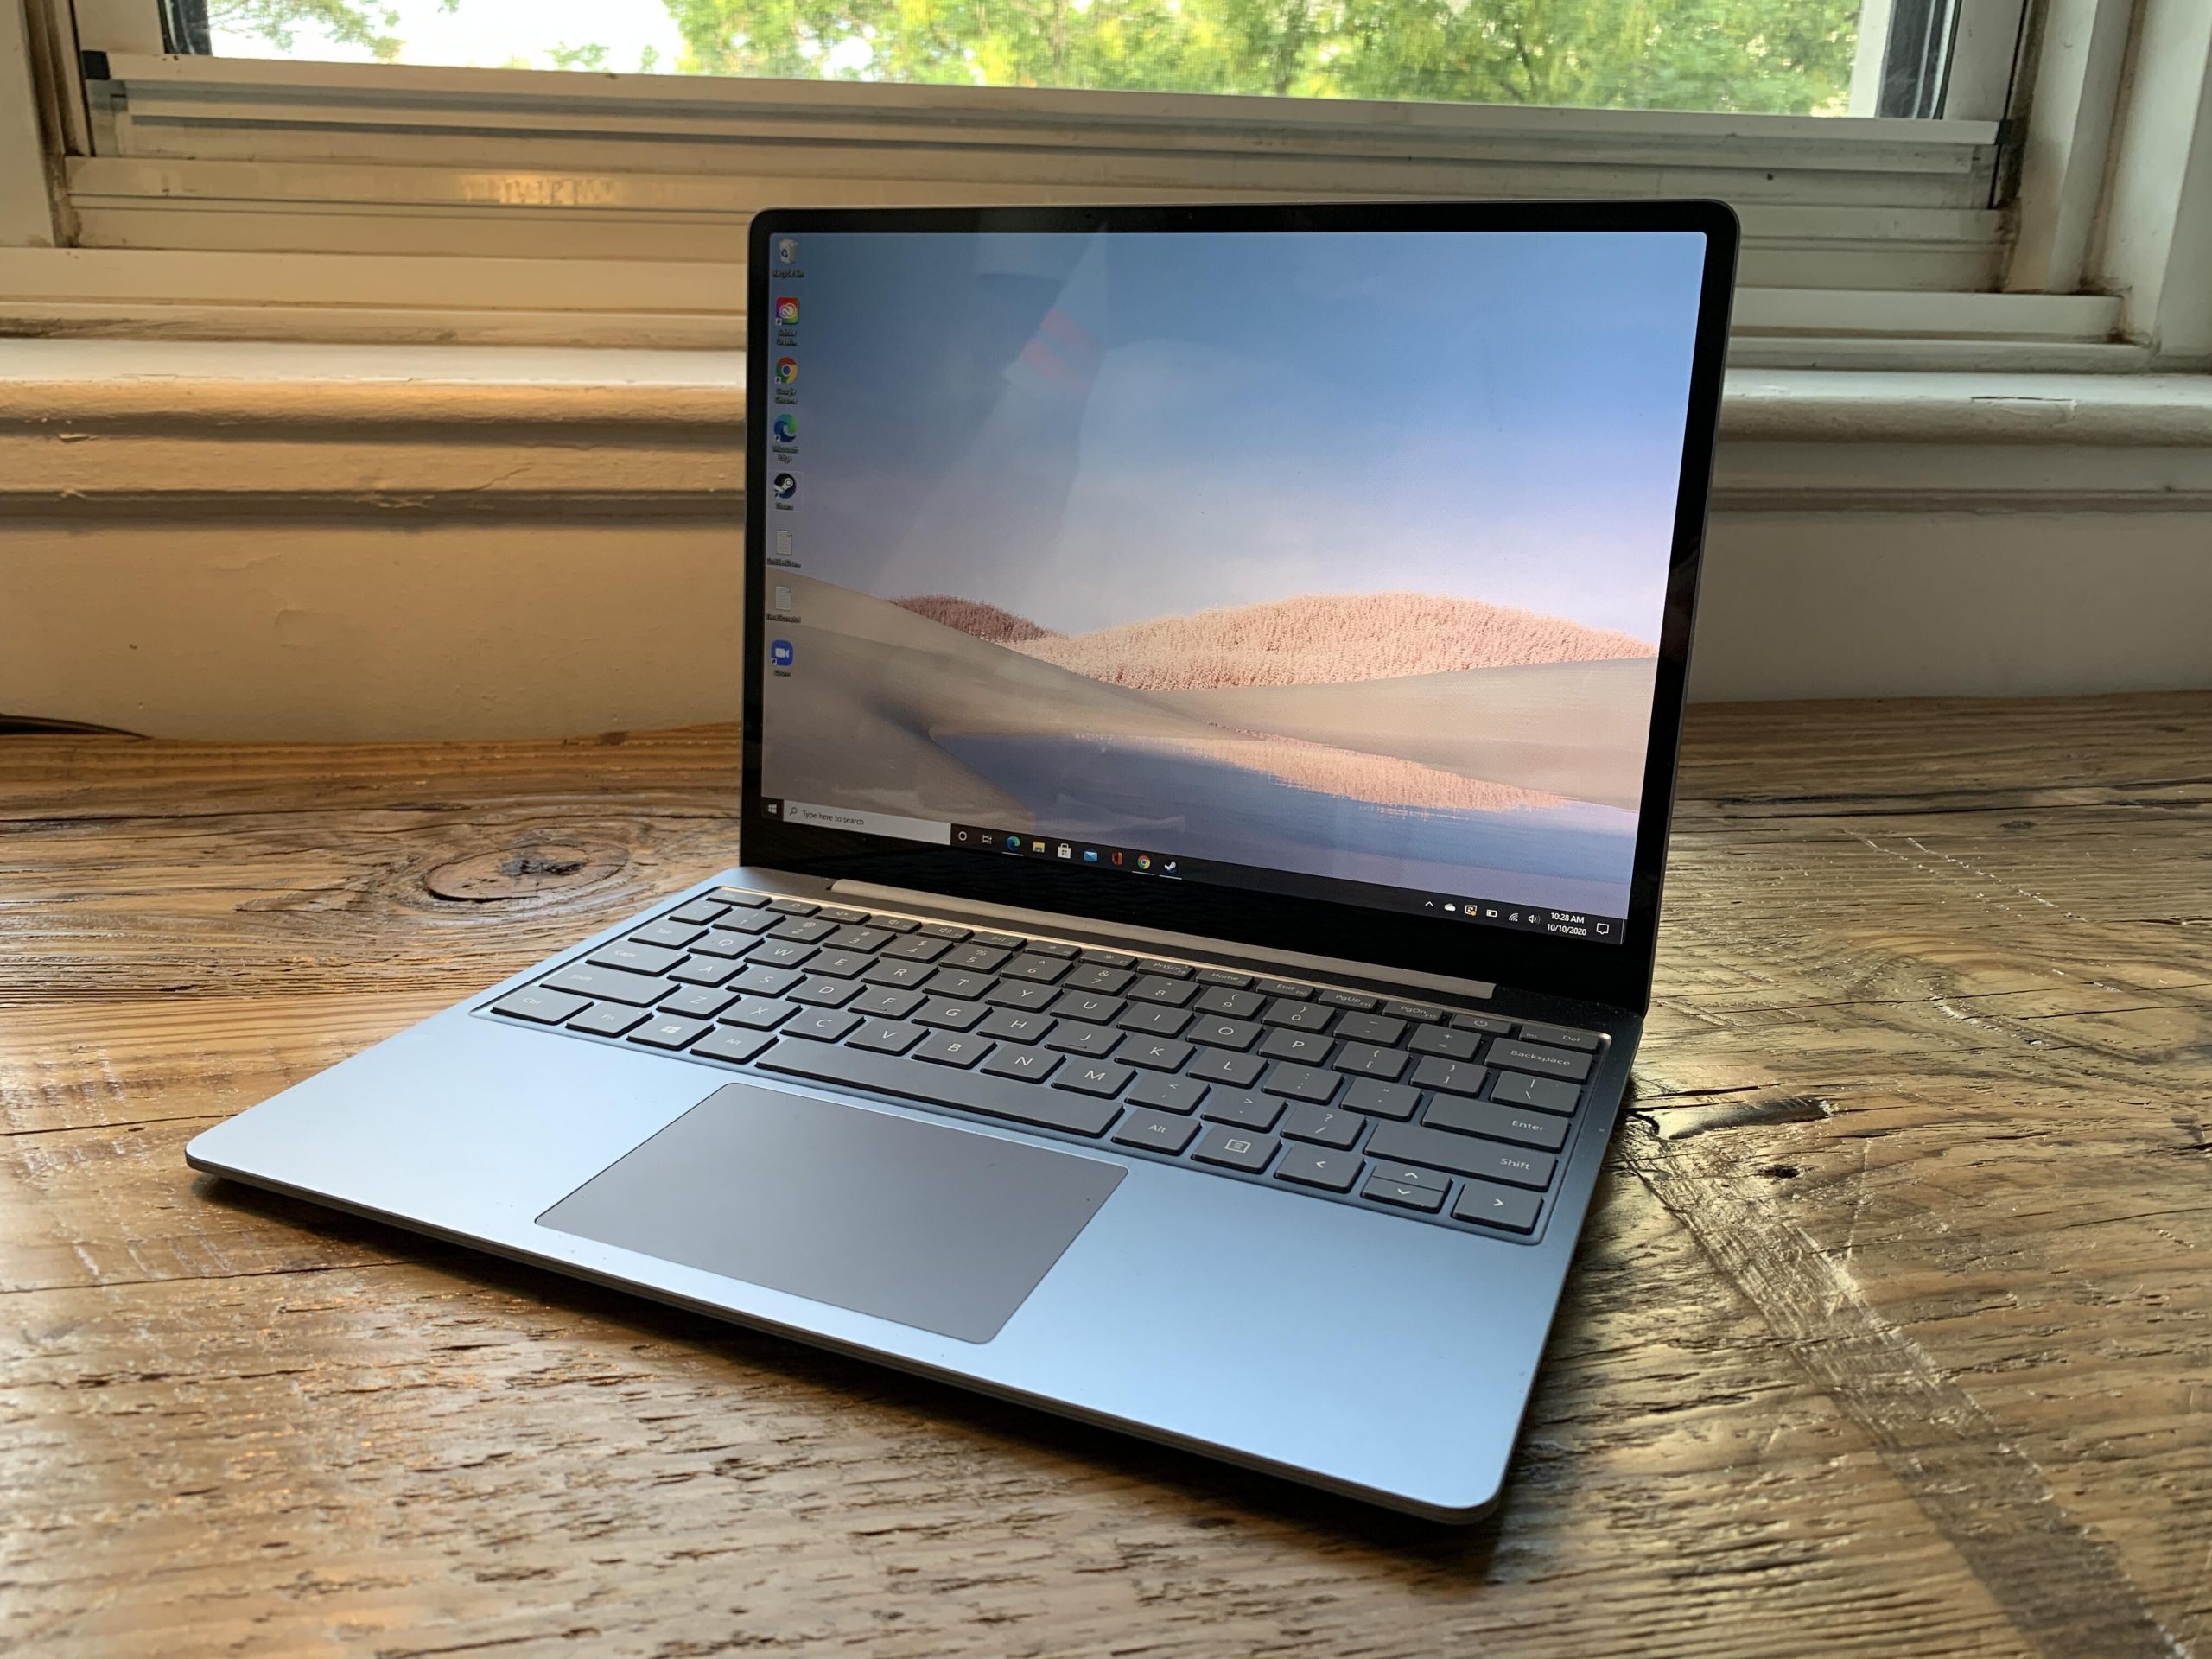 Video: Microsoft Surface Laptop Go review: The best-looking laptop $550